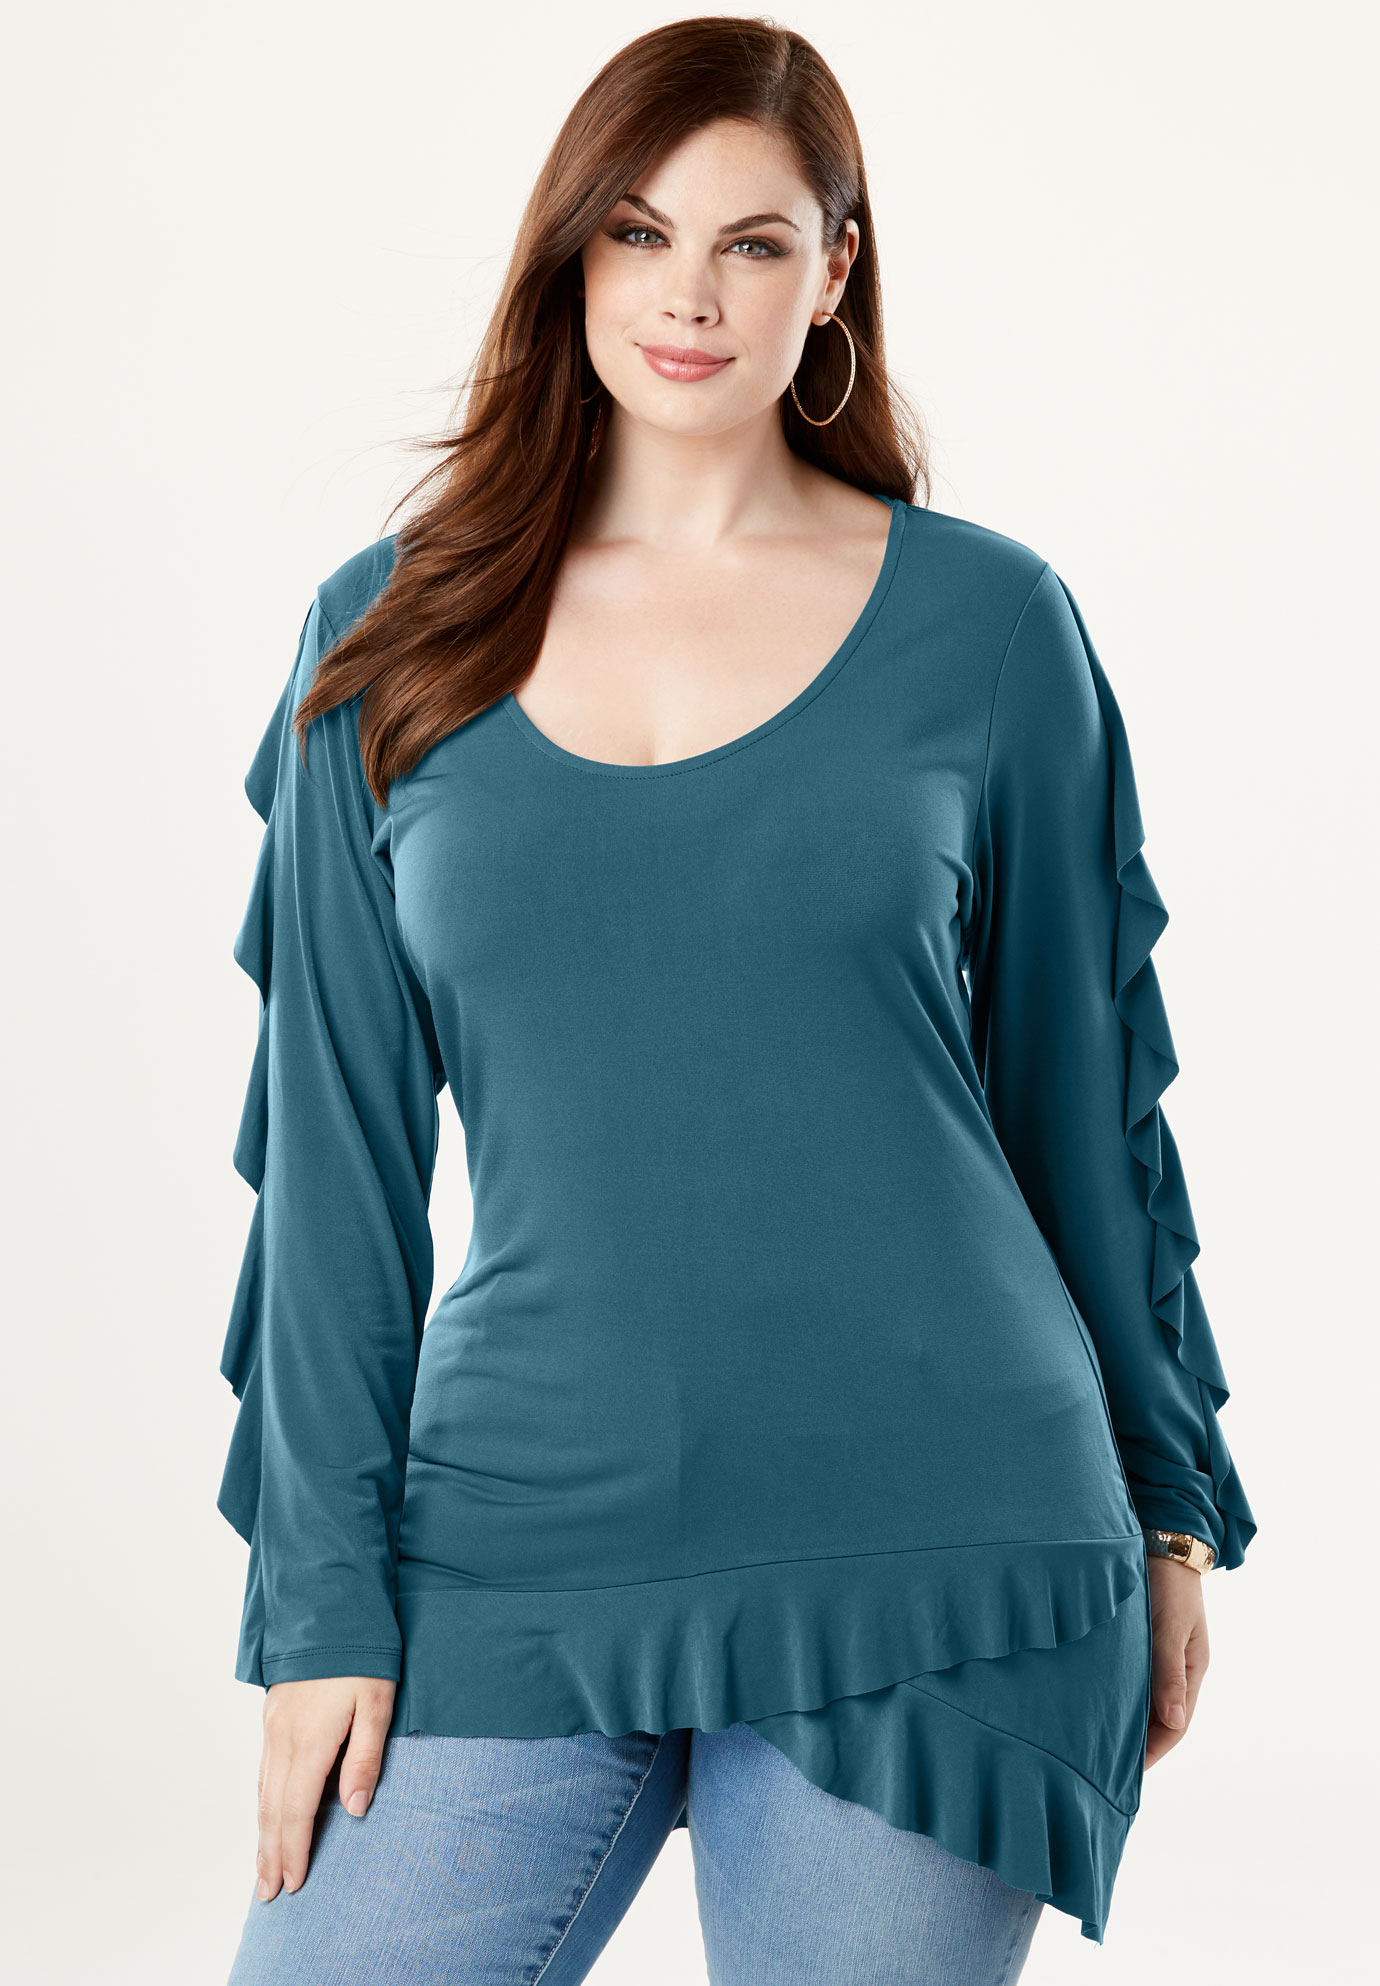 High Low Ruffle Tunic Plus Size Tops And Tees Full Beauty 